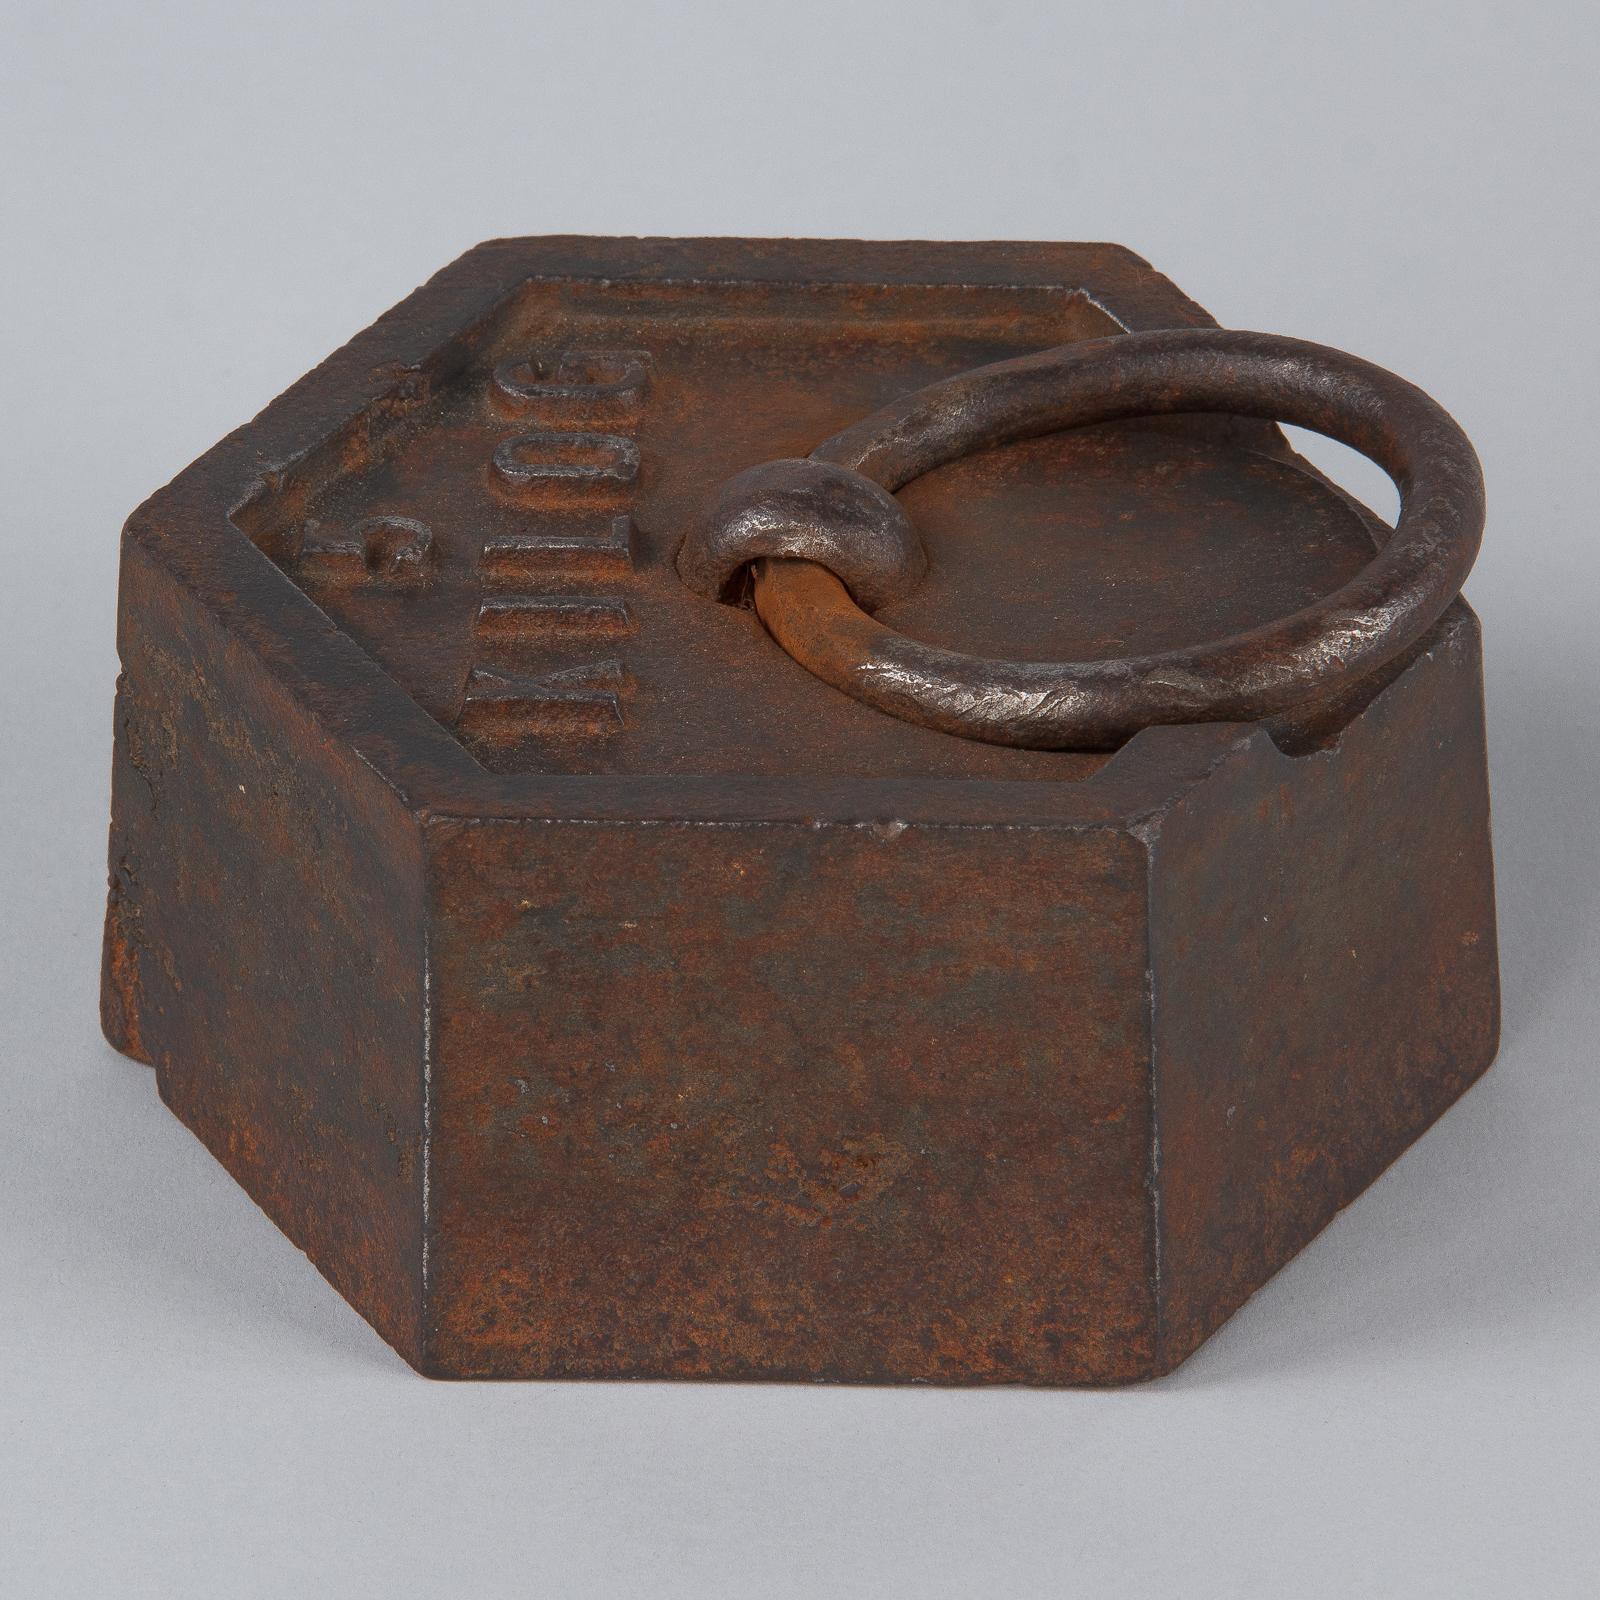 5 Kilogram Iron Scale Weight, France, Early 1900s 3